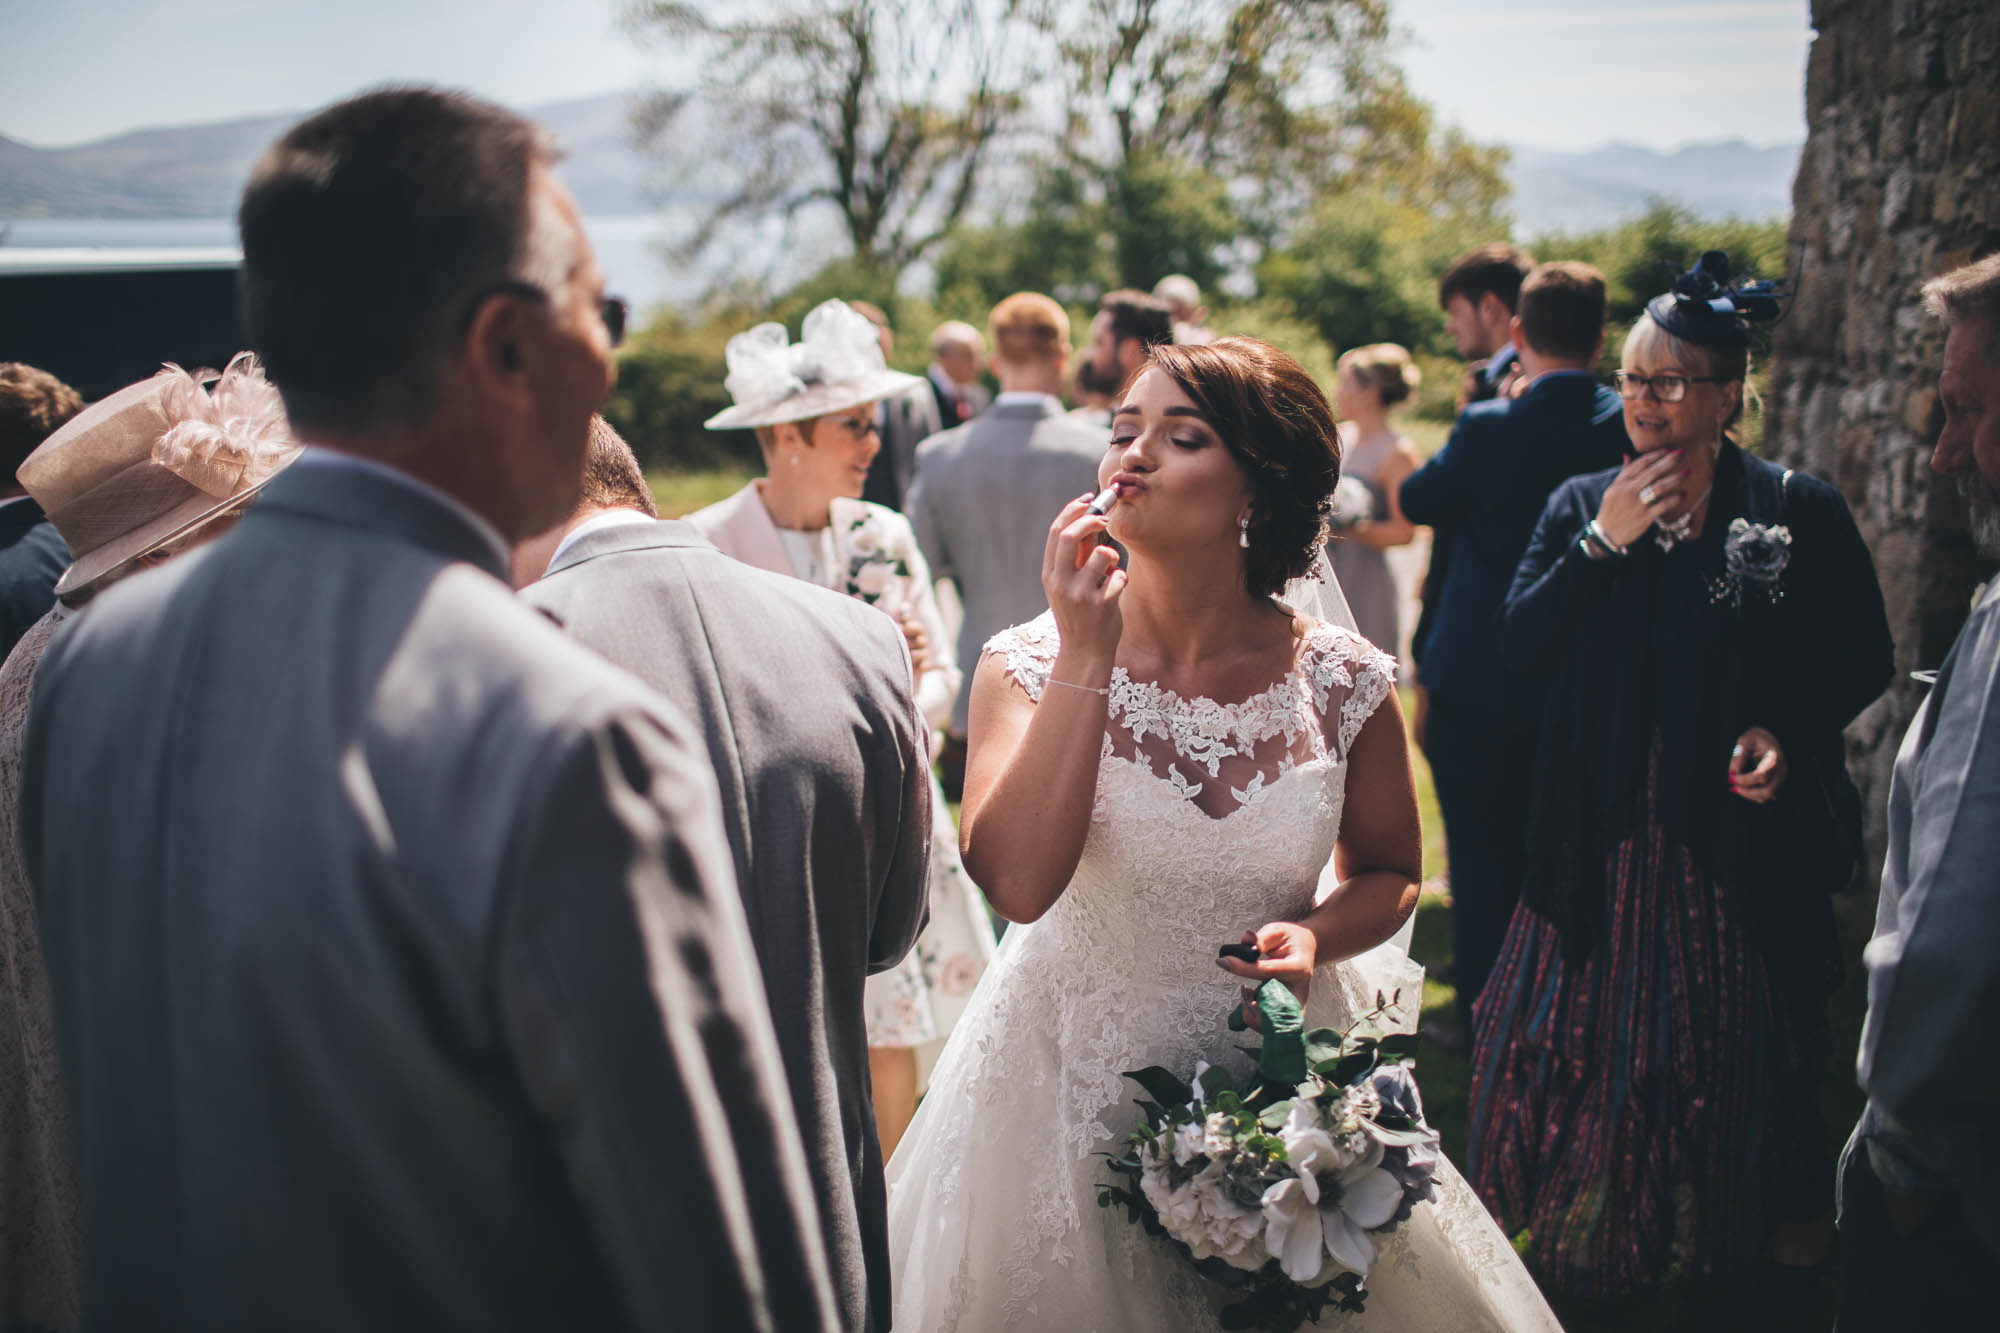 Bride pulls a funny face as she puts on her lipstick in front of her wedding guests just after the ceremony